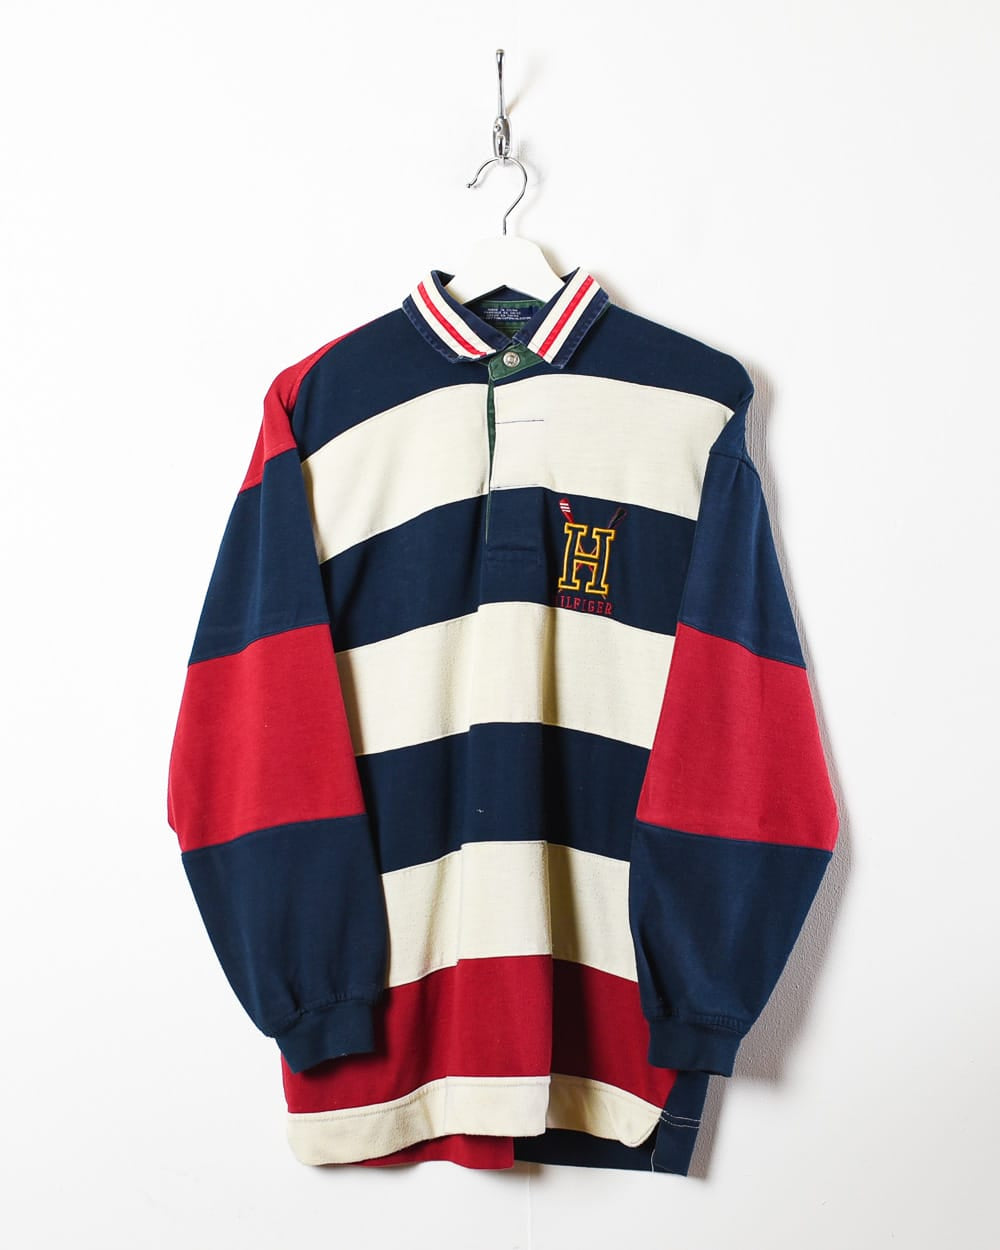 Navy Tommy Hilfiger Rugby Shirt - Small